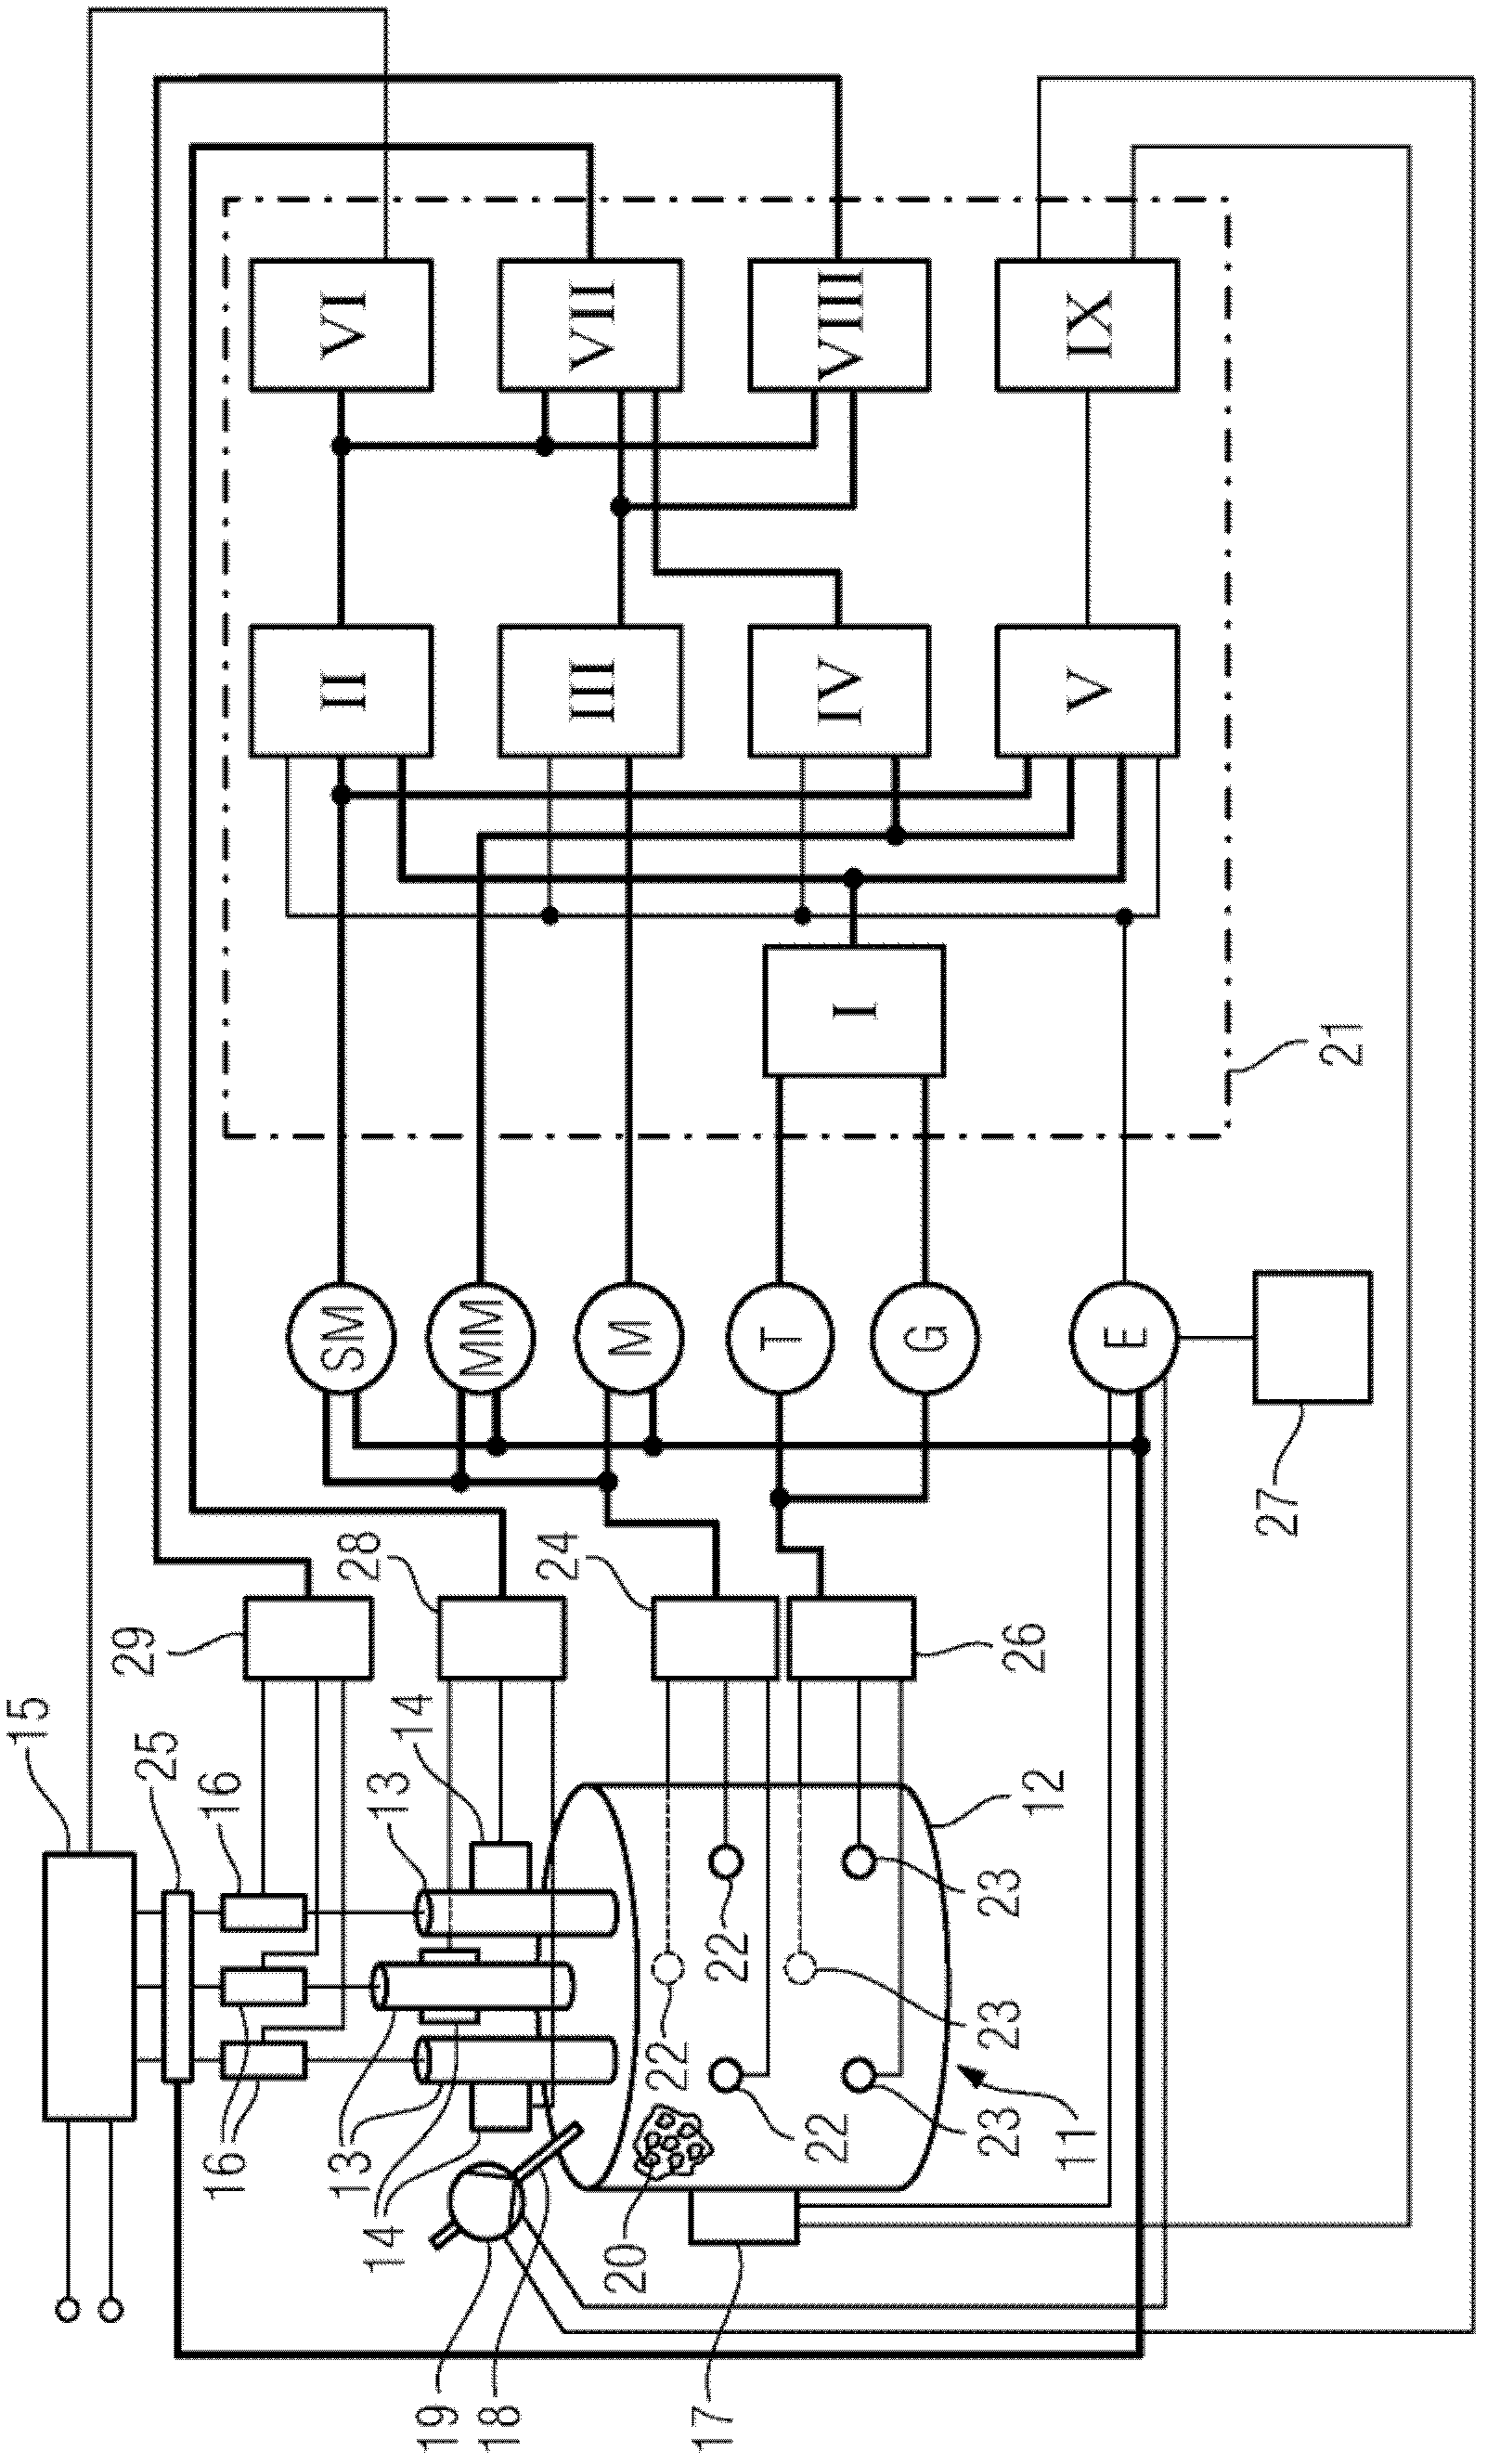 Method for controlling a melt process in an arc furnace and signal processing component, program code, and data medium for performing said method